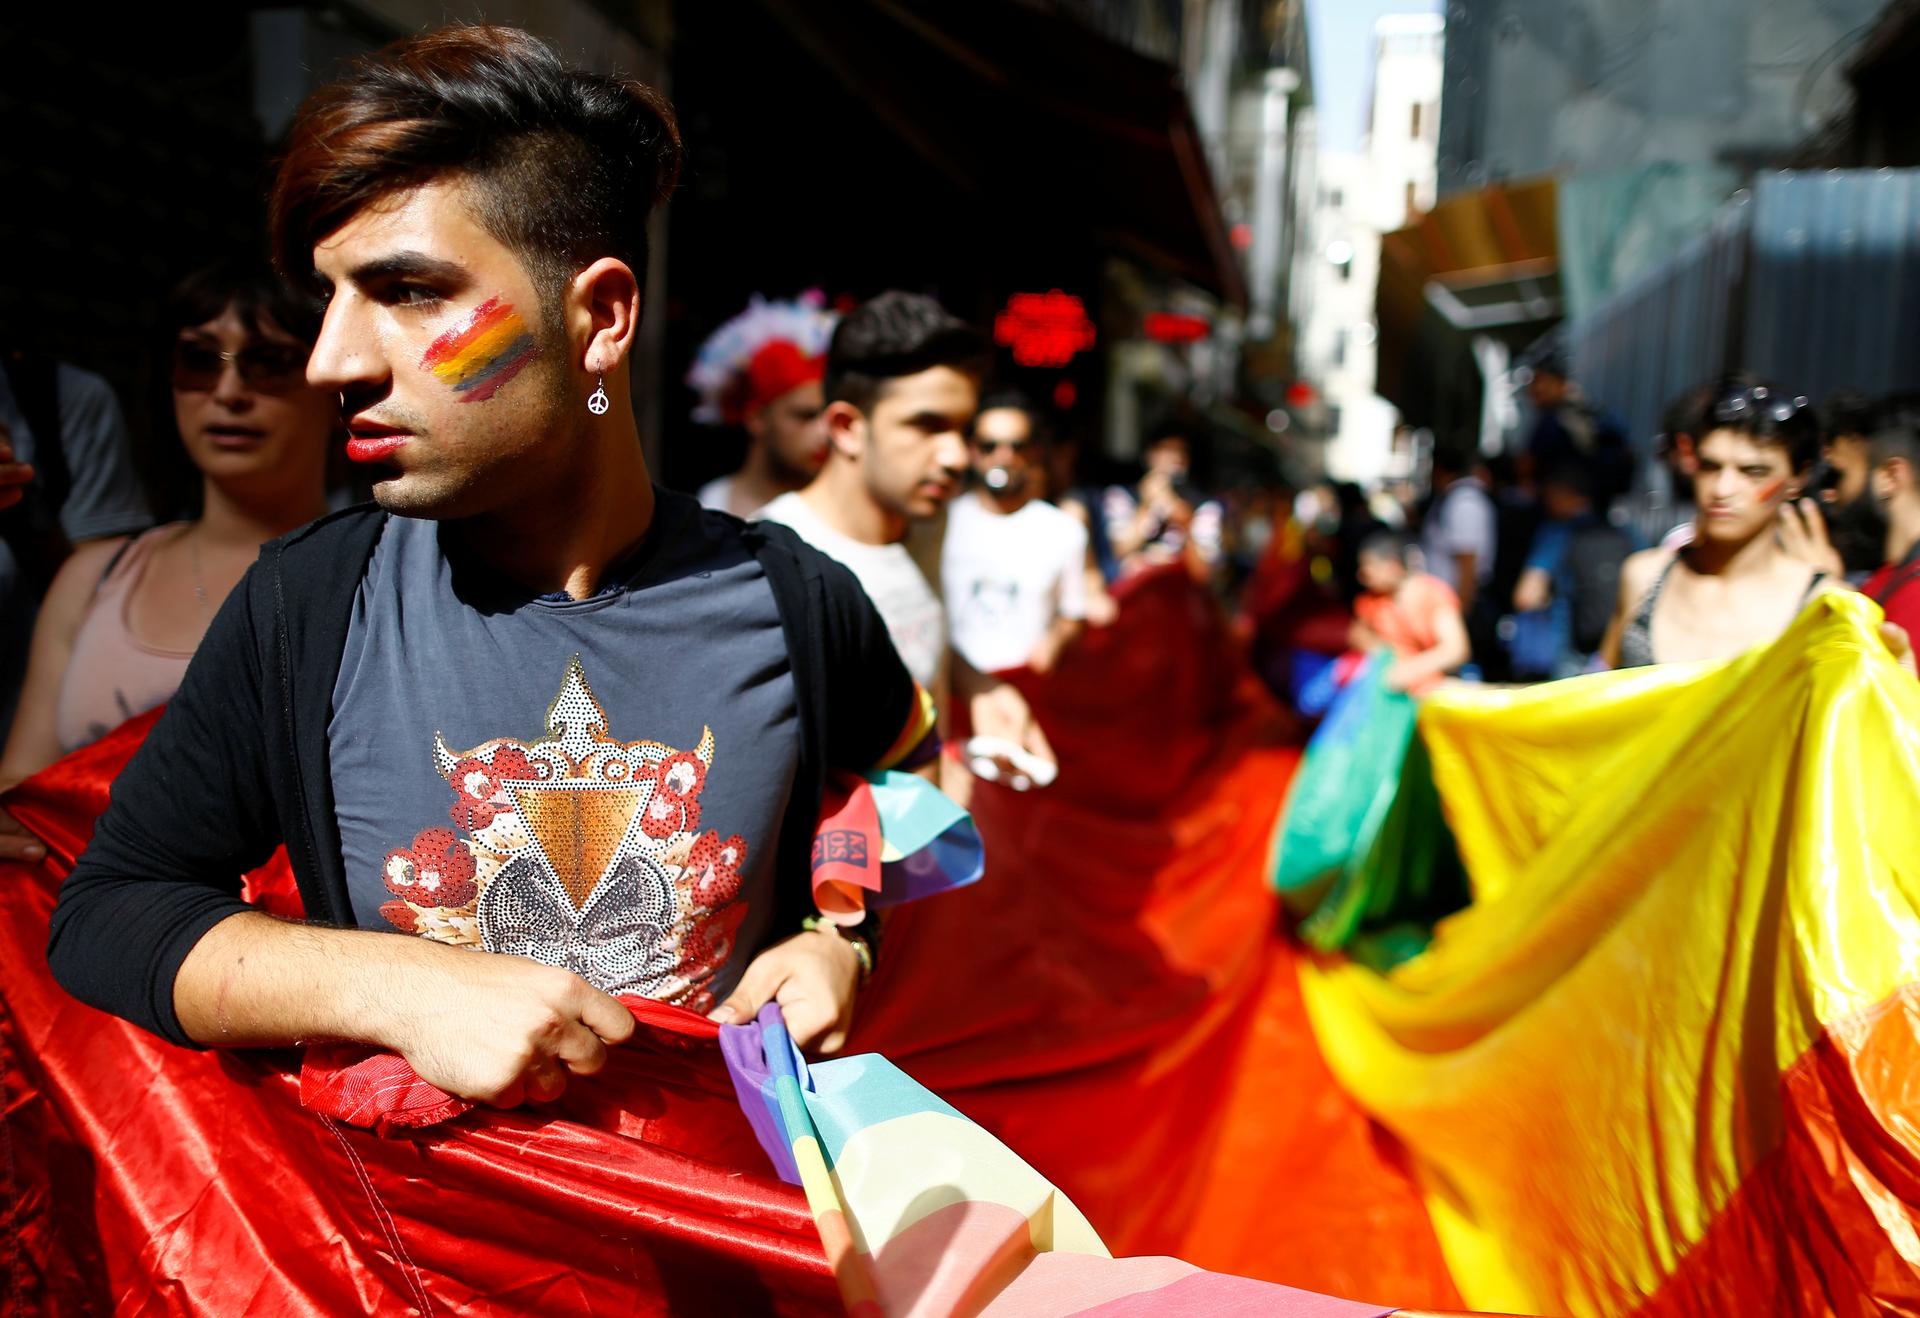 LGBT rights activists hold a rainbow flag during a transgender pride parade which was banned by the governorship, in central Istanbul, Turkey, June 19, 2016